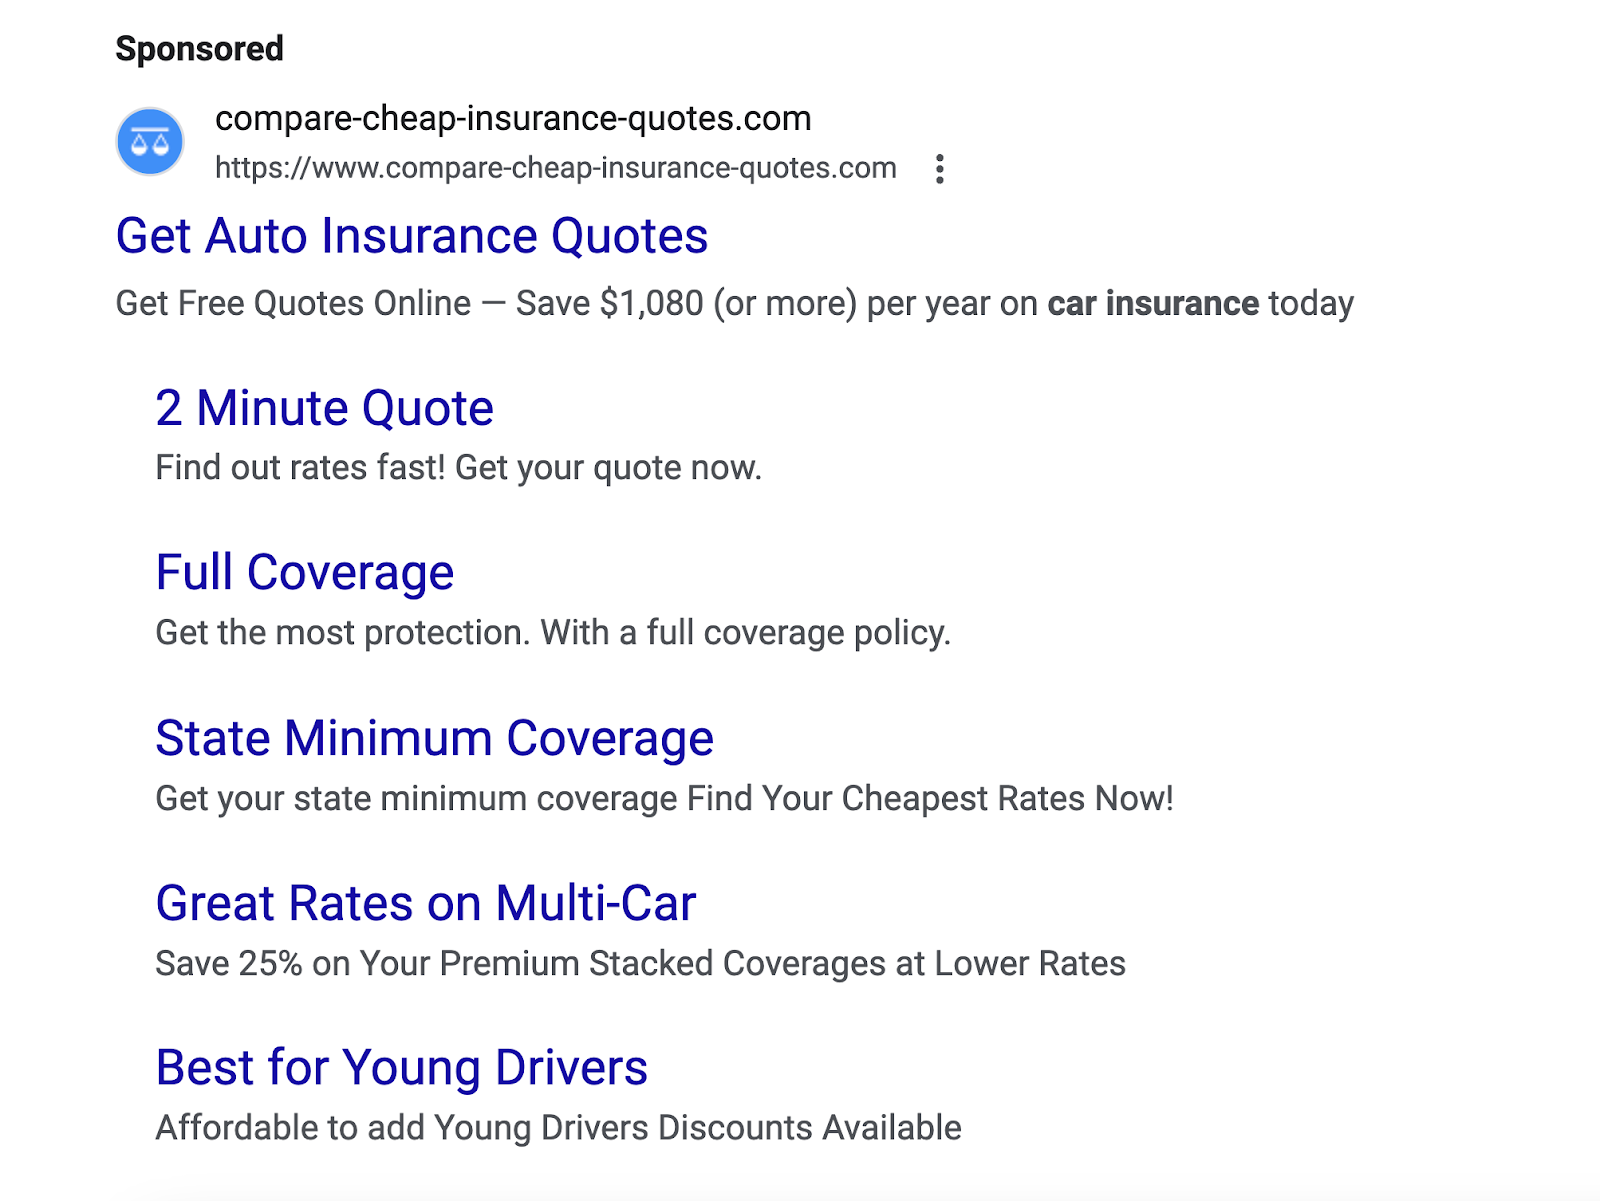 google search ad copy says get auto insurance quotes with sitelinks